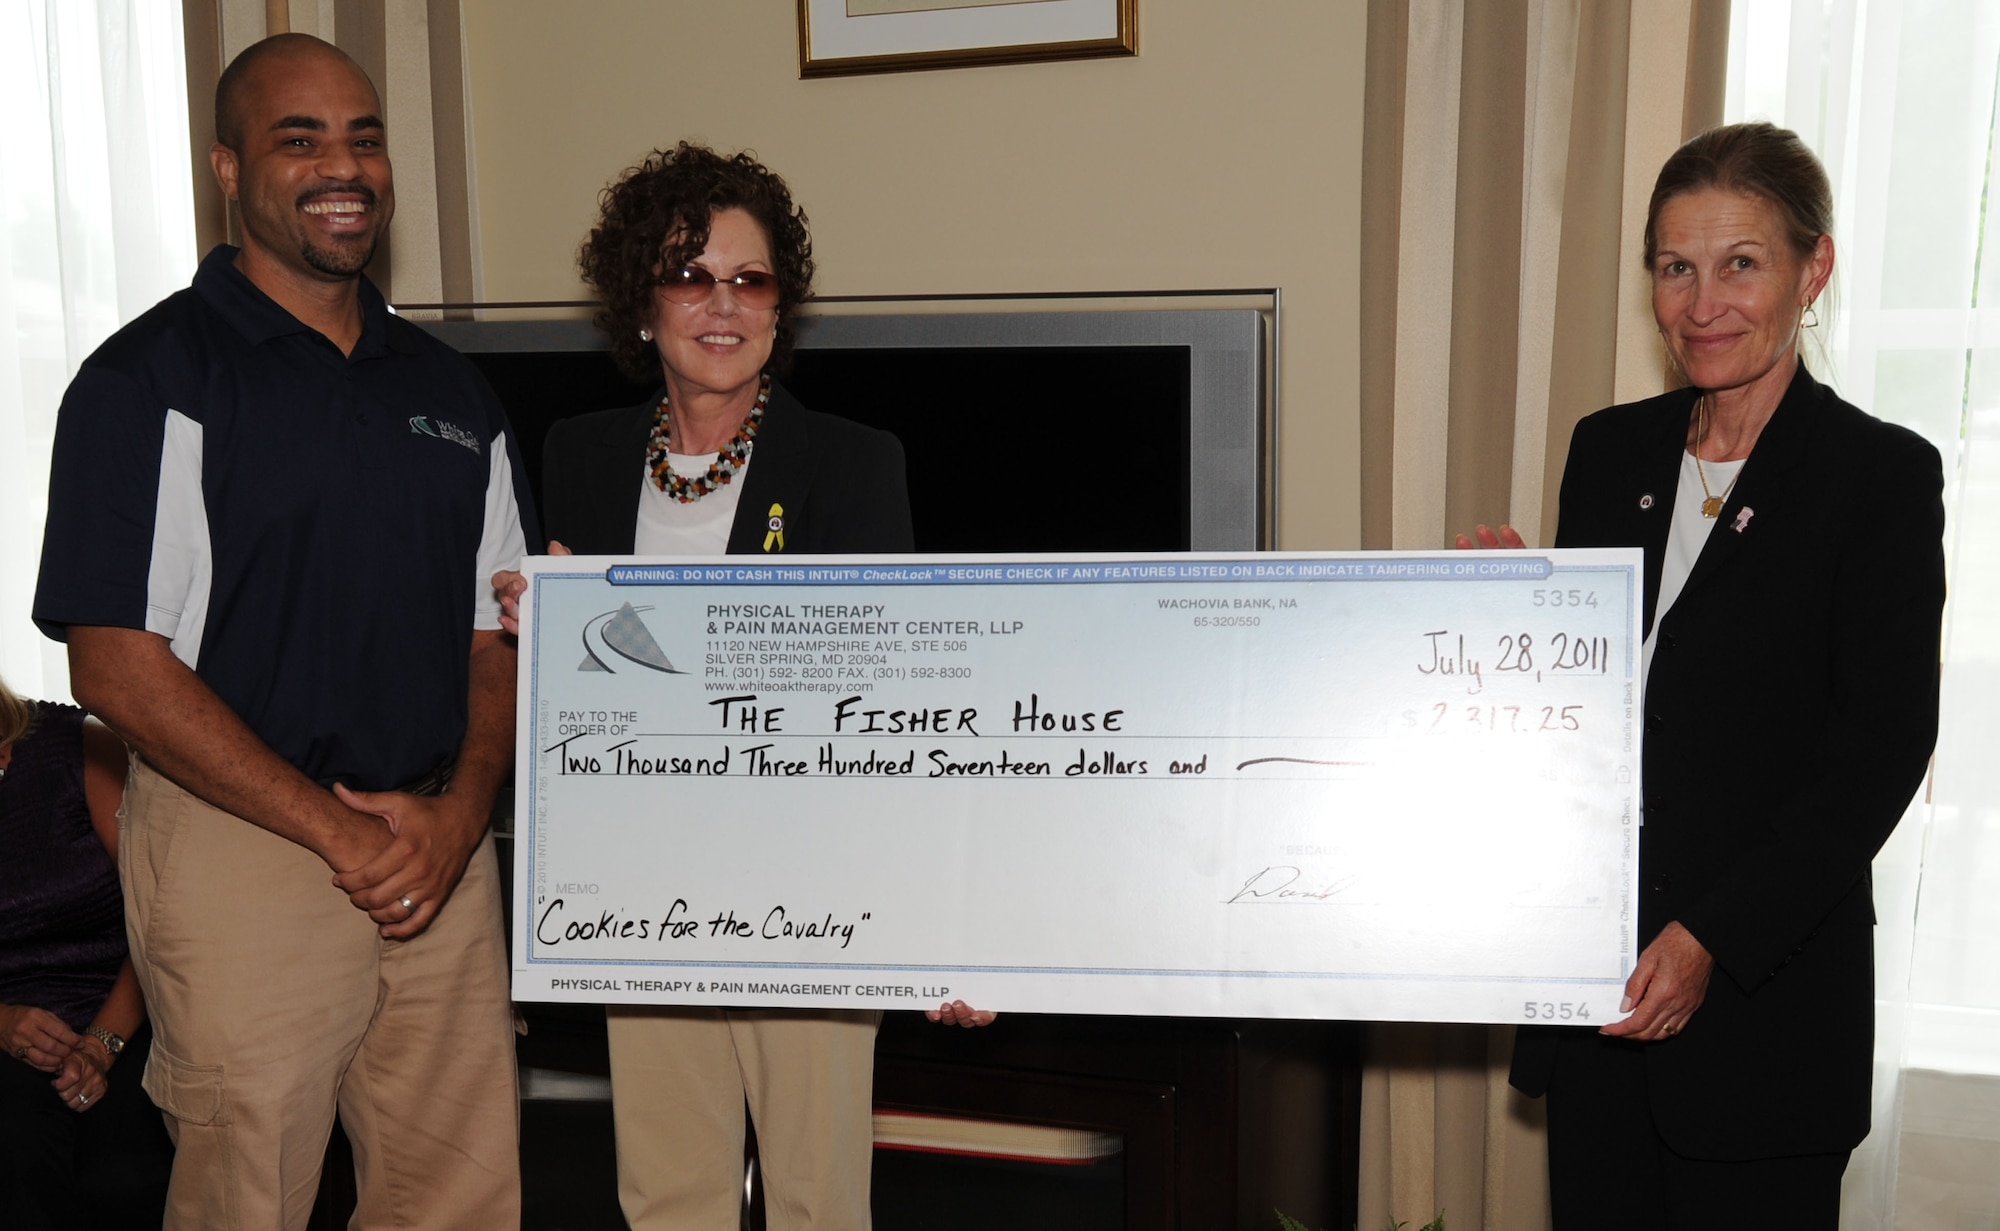 Mr. David Bullock, co-founder of White Oak Physical Therapy and Pain Management Center, Silver Springs, Md., presents a donation to the Fisher House Foundation during a ceremony at the Fisher House on Joint Base Andrews, Md. Bullock held a fundraiser called “Cookies for the Cavalry” at his office where clients brought in baked goods or made donations to raise money for the Fisher House Foundation. (U.S. Air Force photo by Staff Sgt. Christopher Ruano)